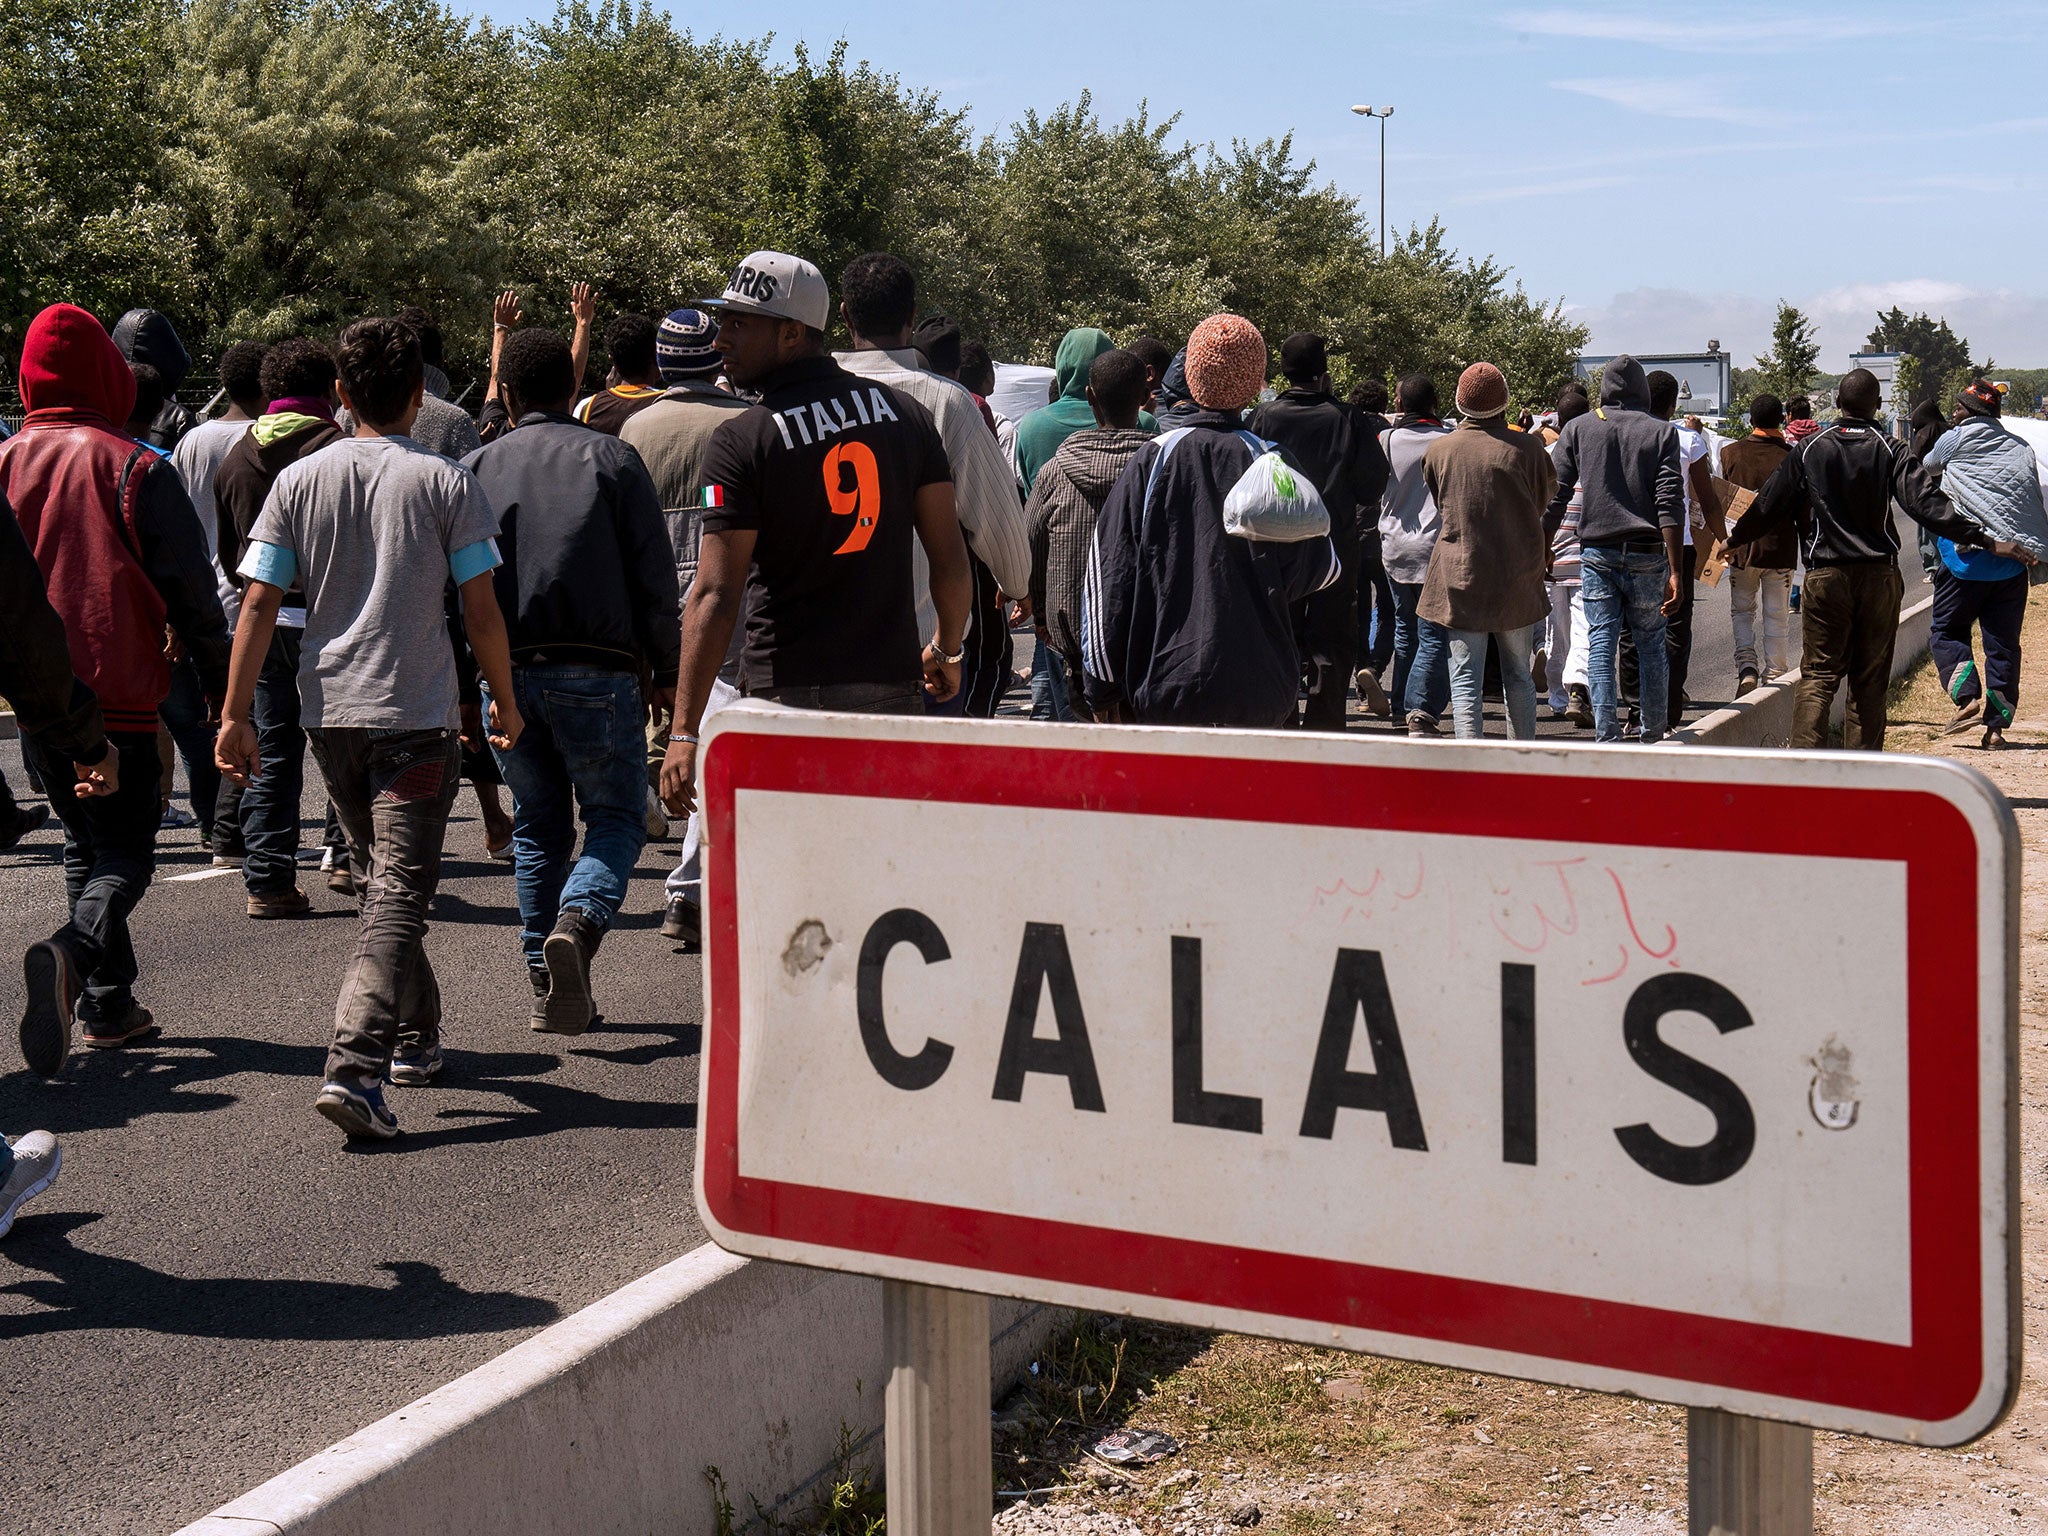 Migrants trying to cross into Britain from Calais led the Prime Minister to claim 'swarms' were heading for the UK